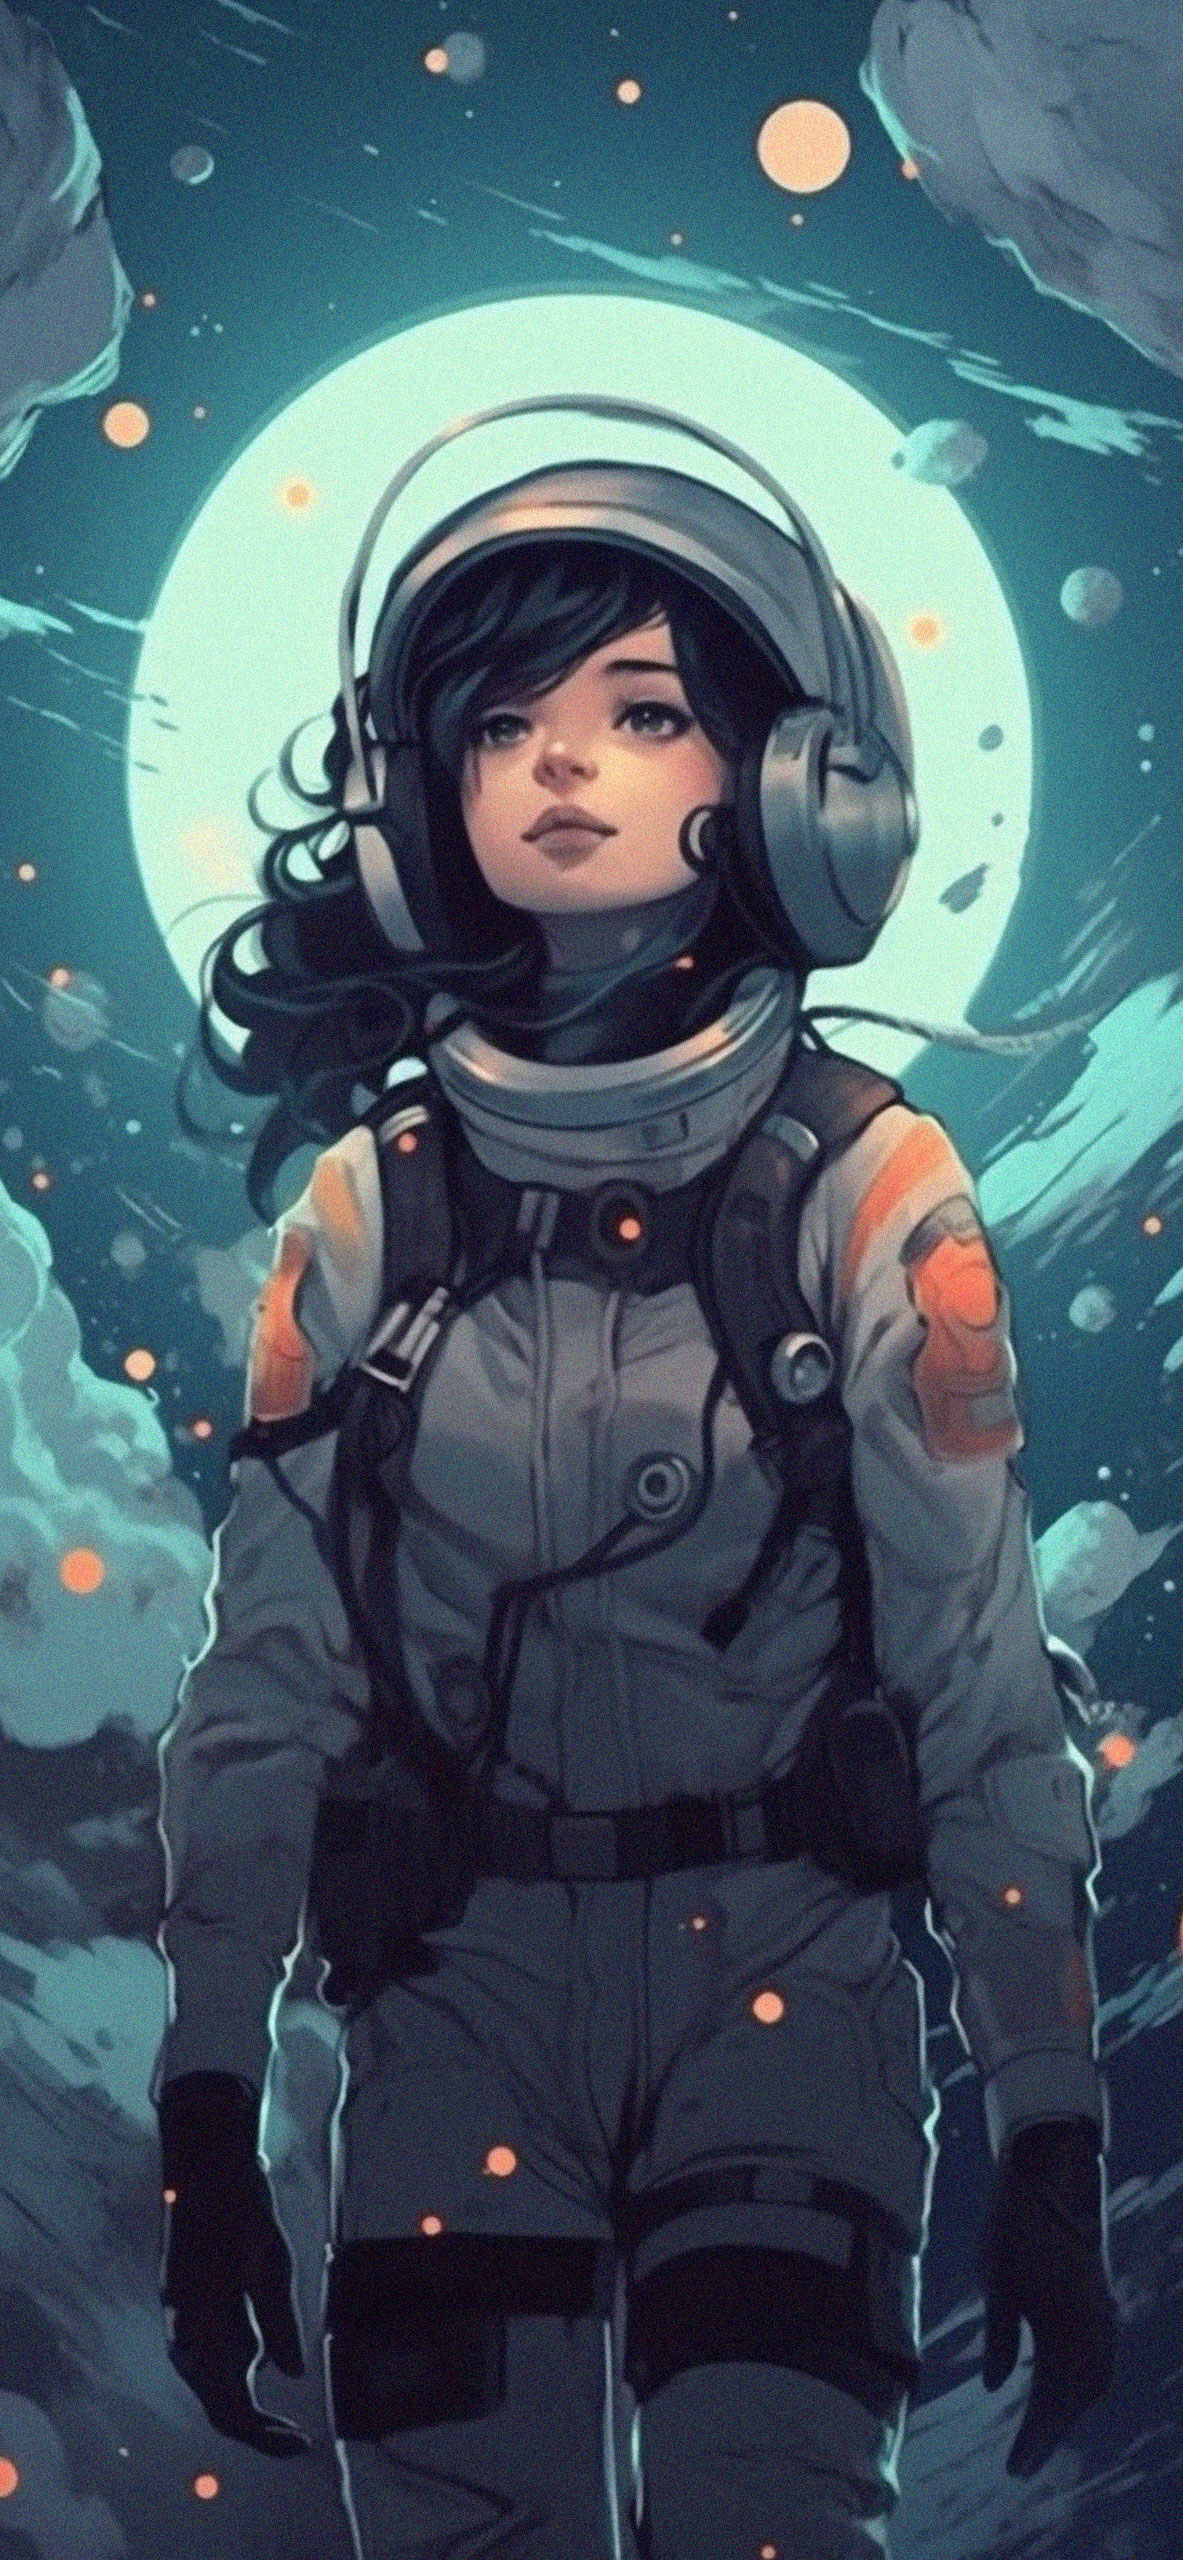 Girl in a Space Suit Art Wallpaper Cool Girl Wallpaper for iPh